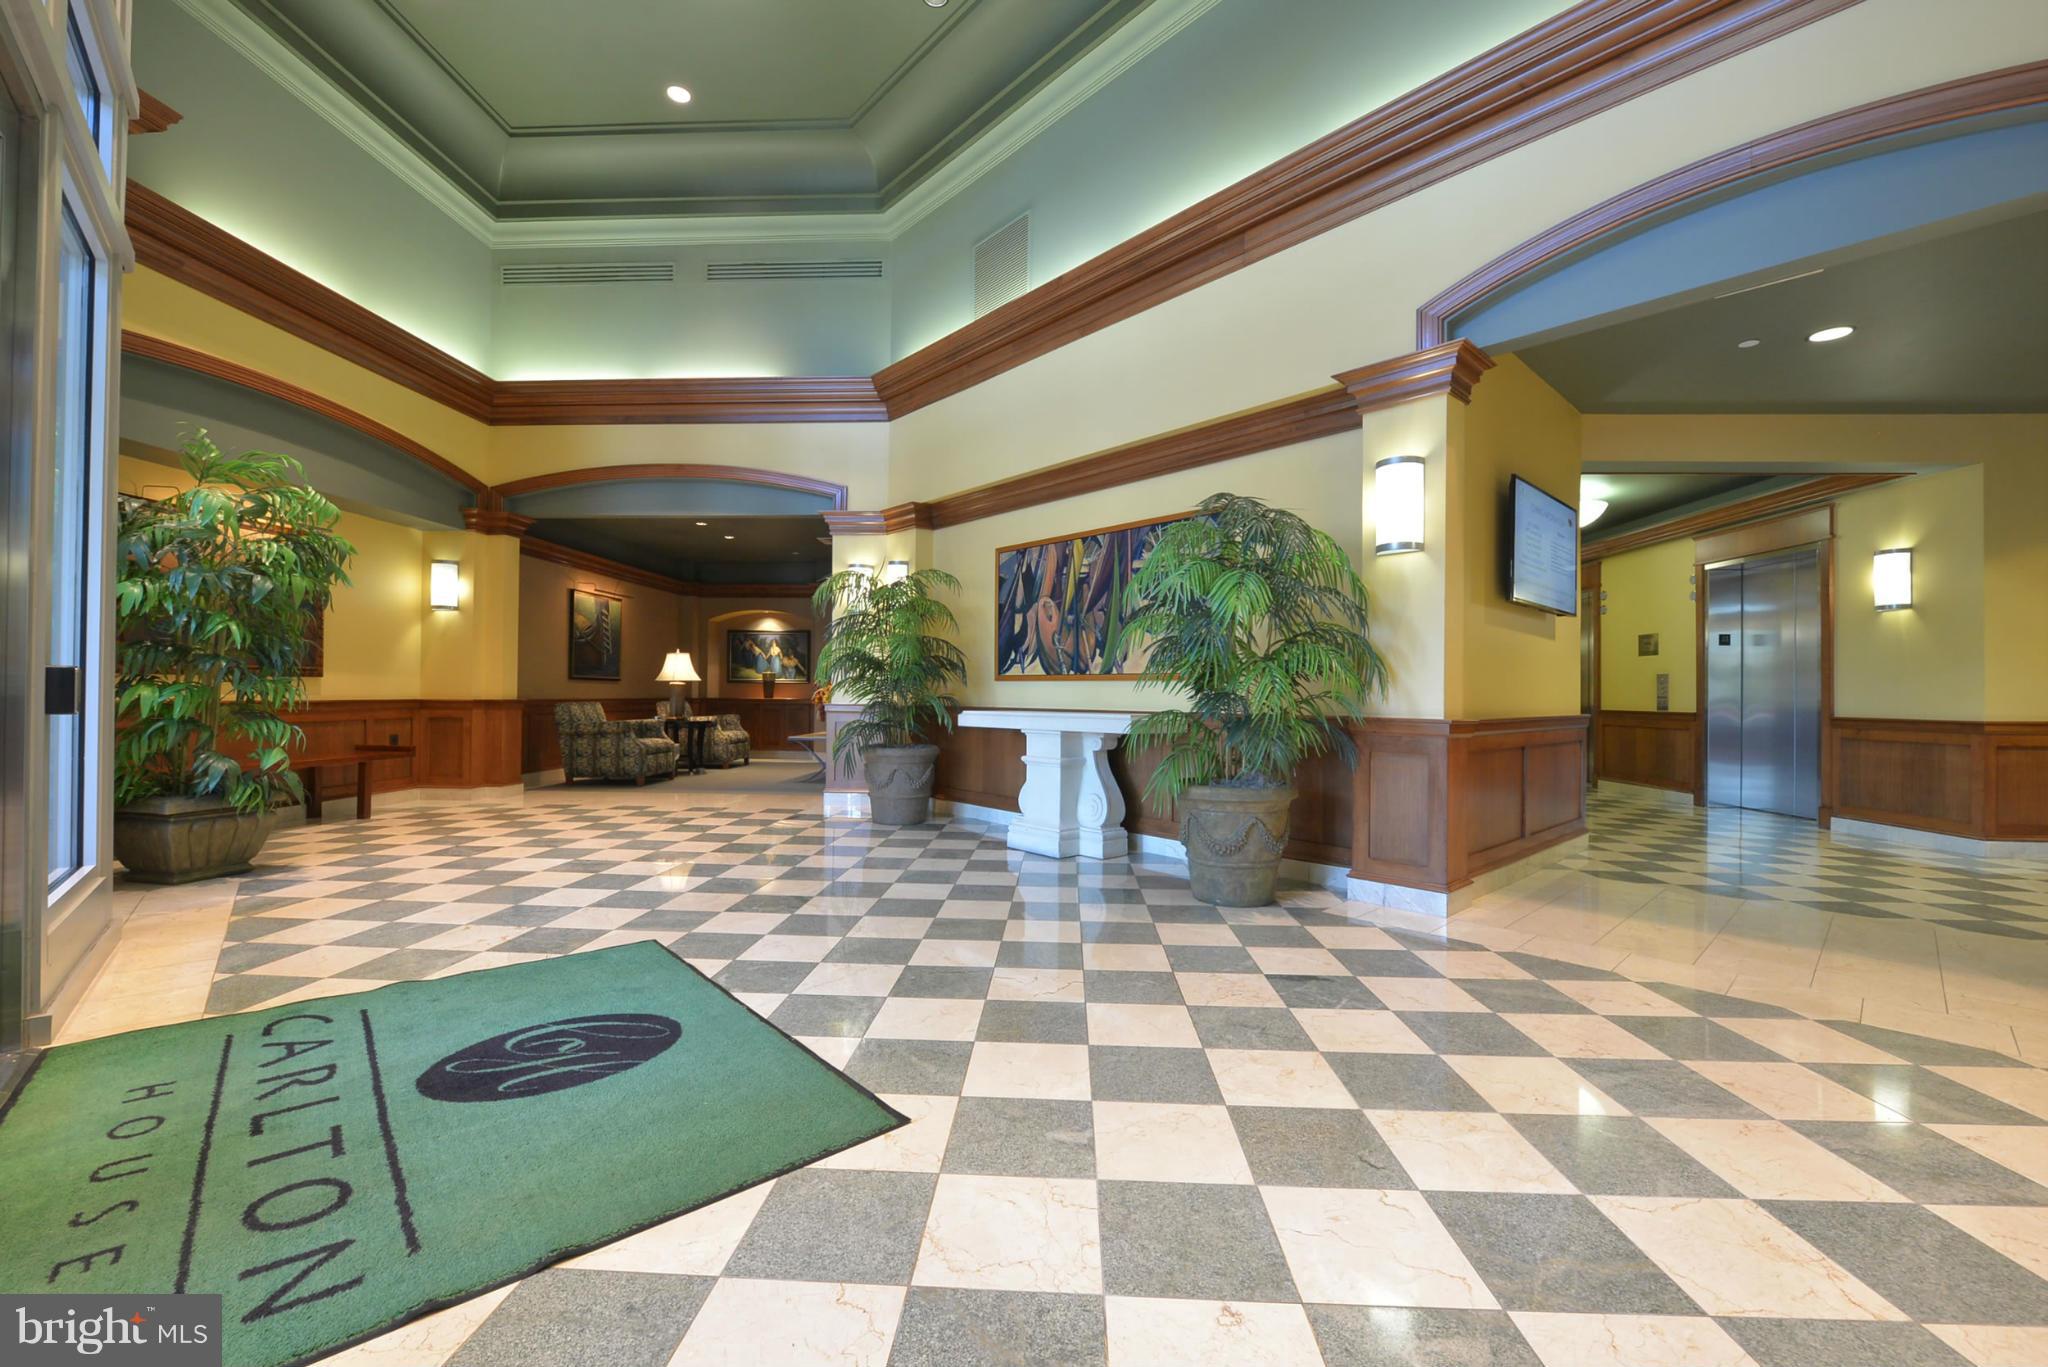 a view of a lobby with a rug floor and a rug